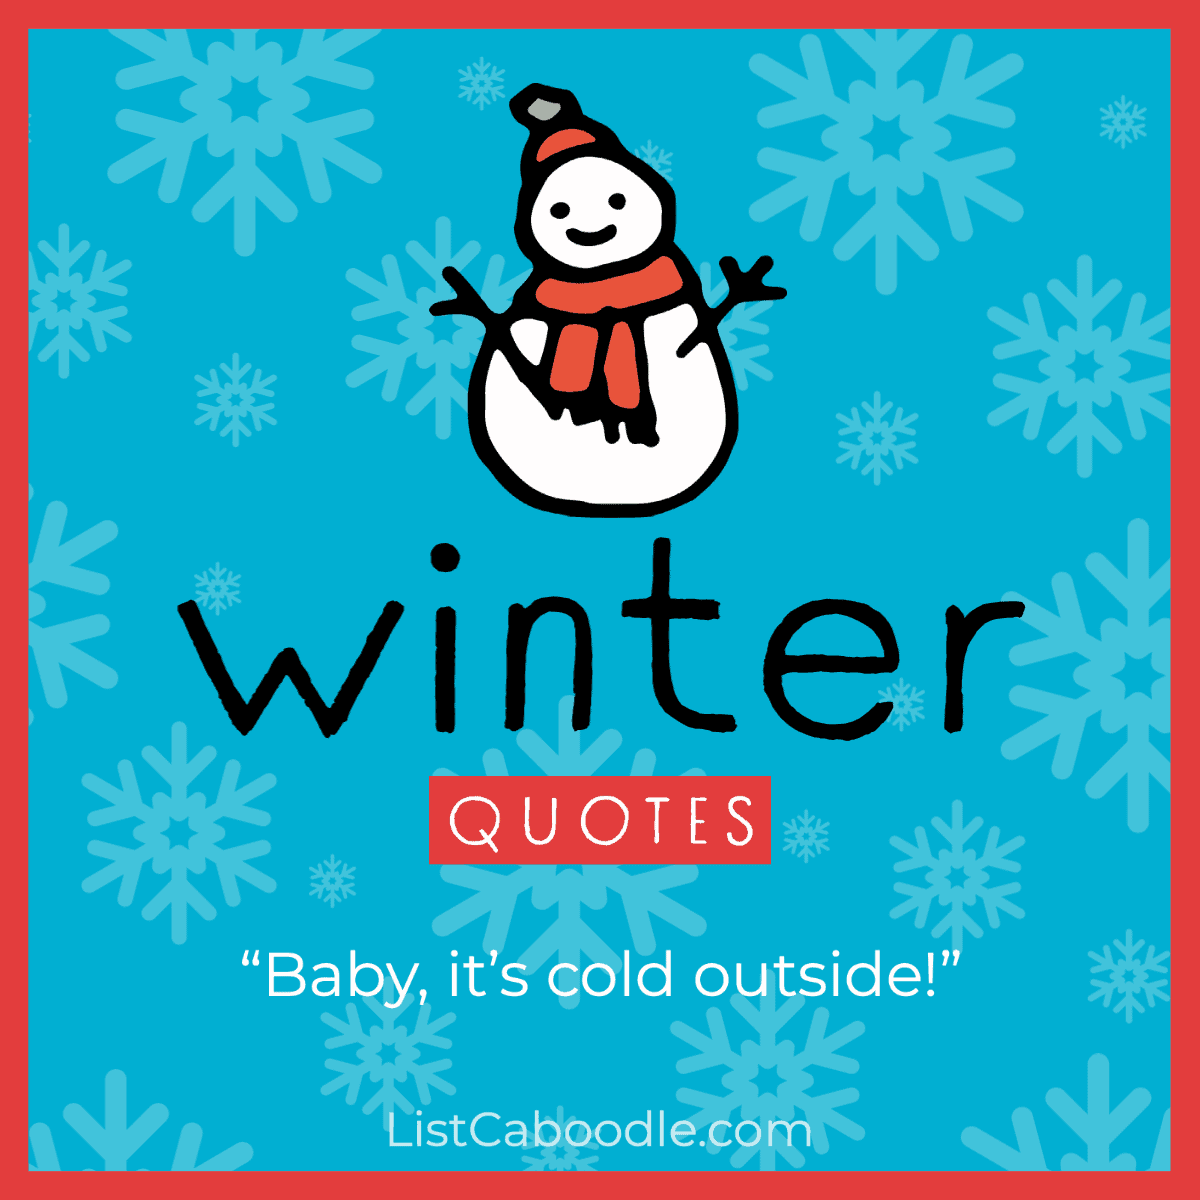 Winter quotes image